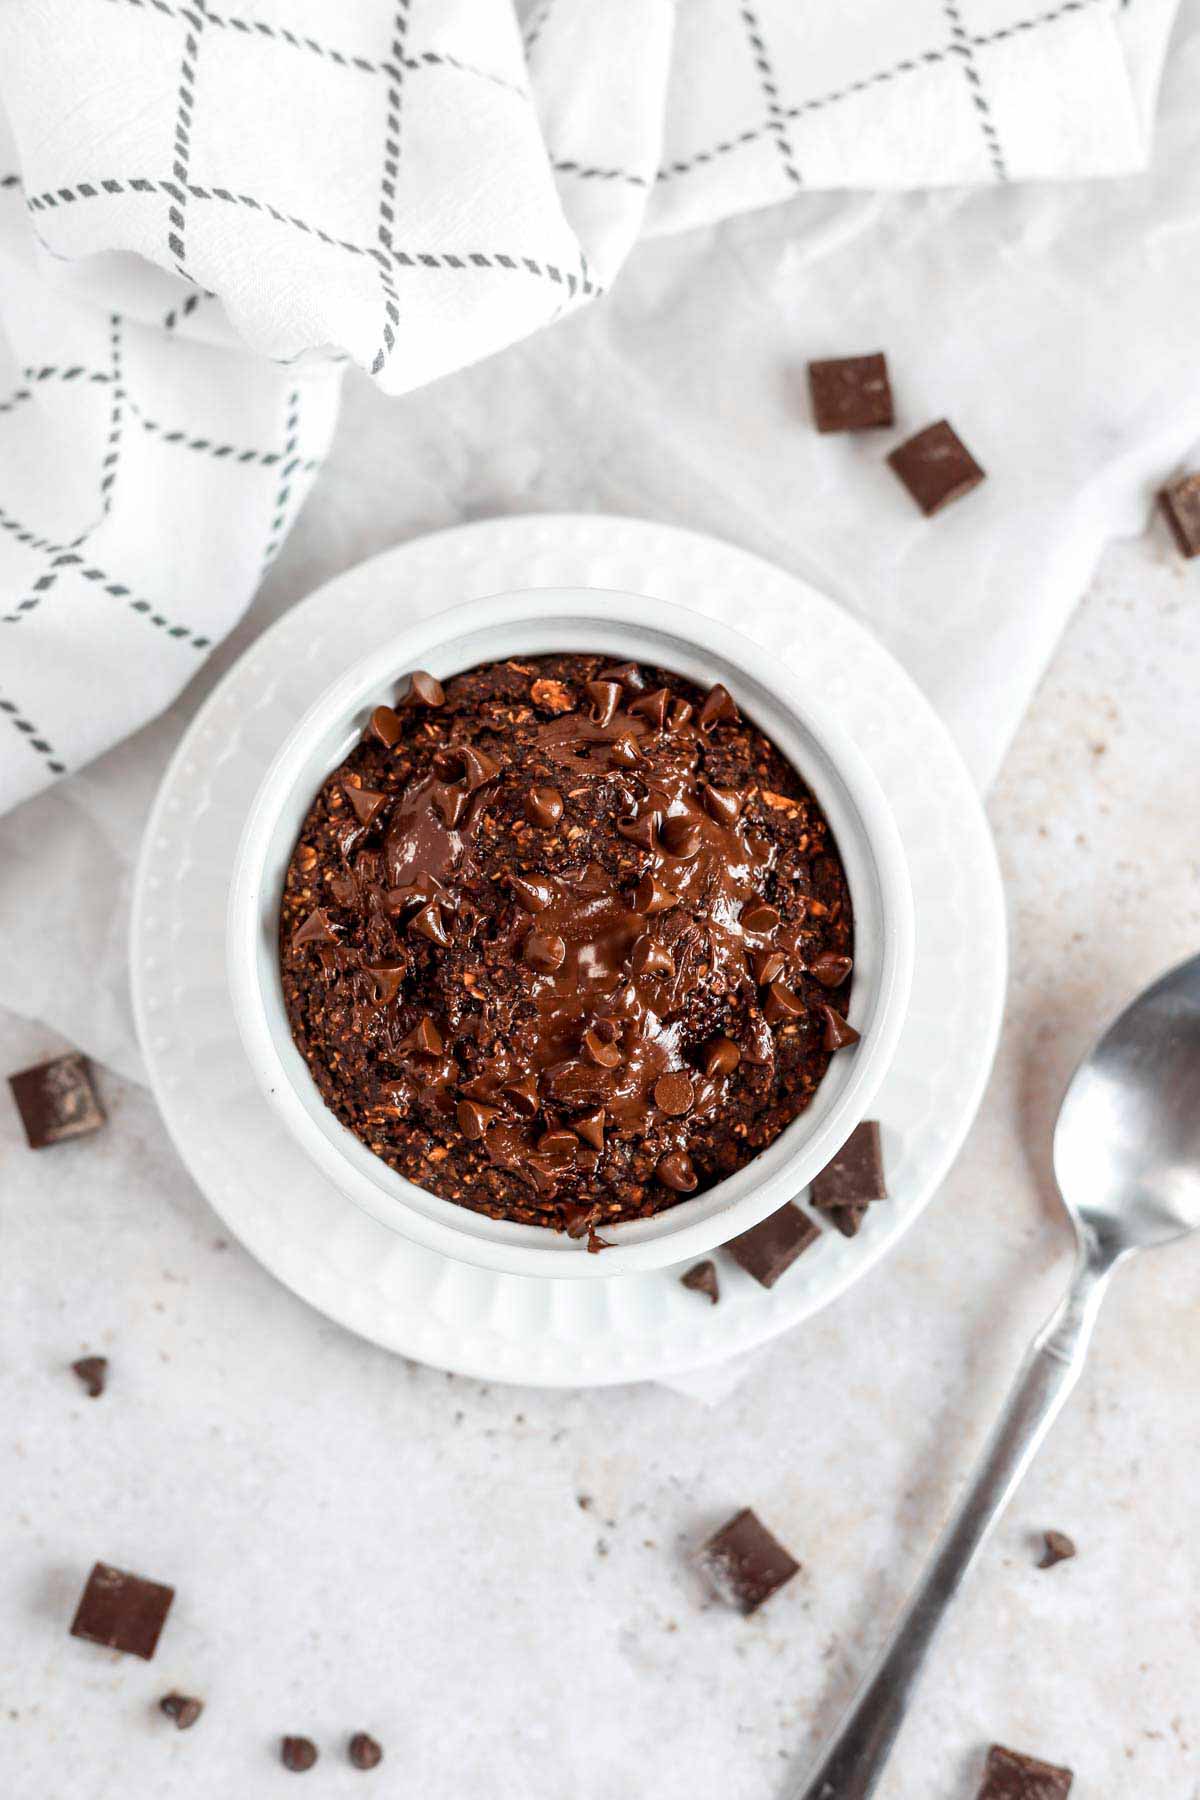 a ramekin of chocolate baked oats on a small dessert plate, with a spoon next to the plate. There is melted chocolate on top of the oats.